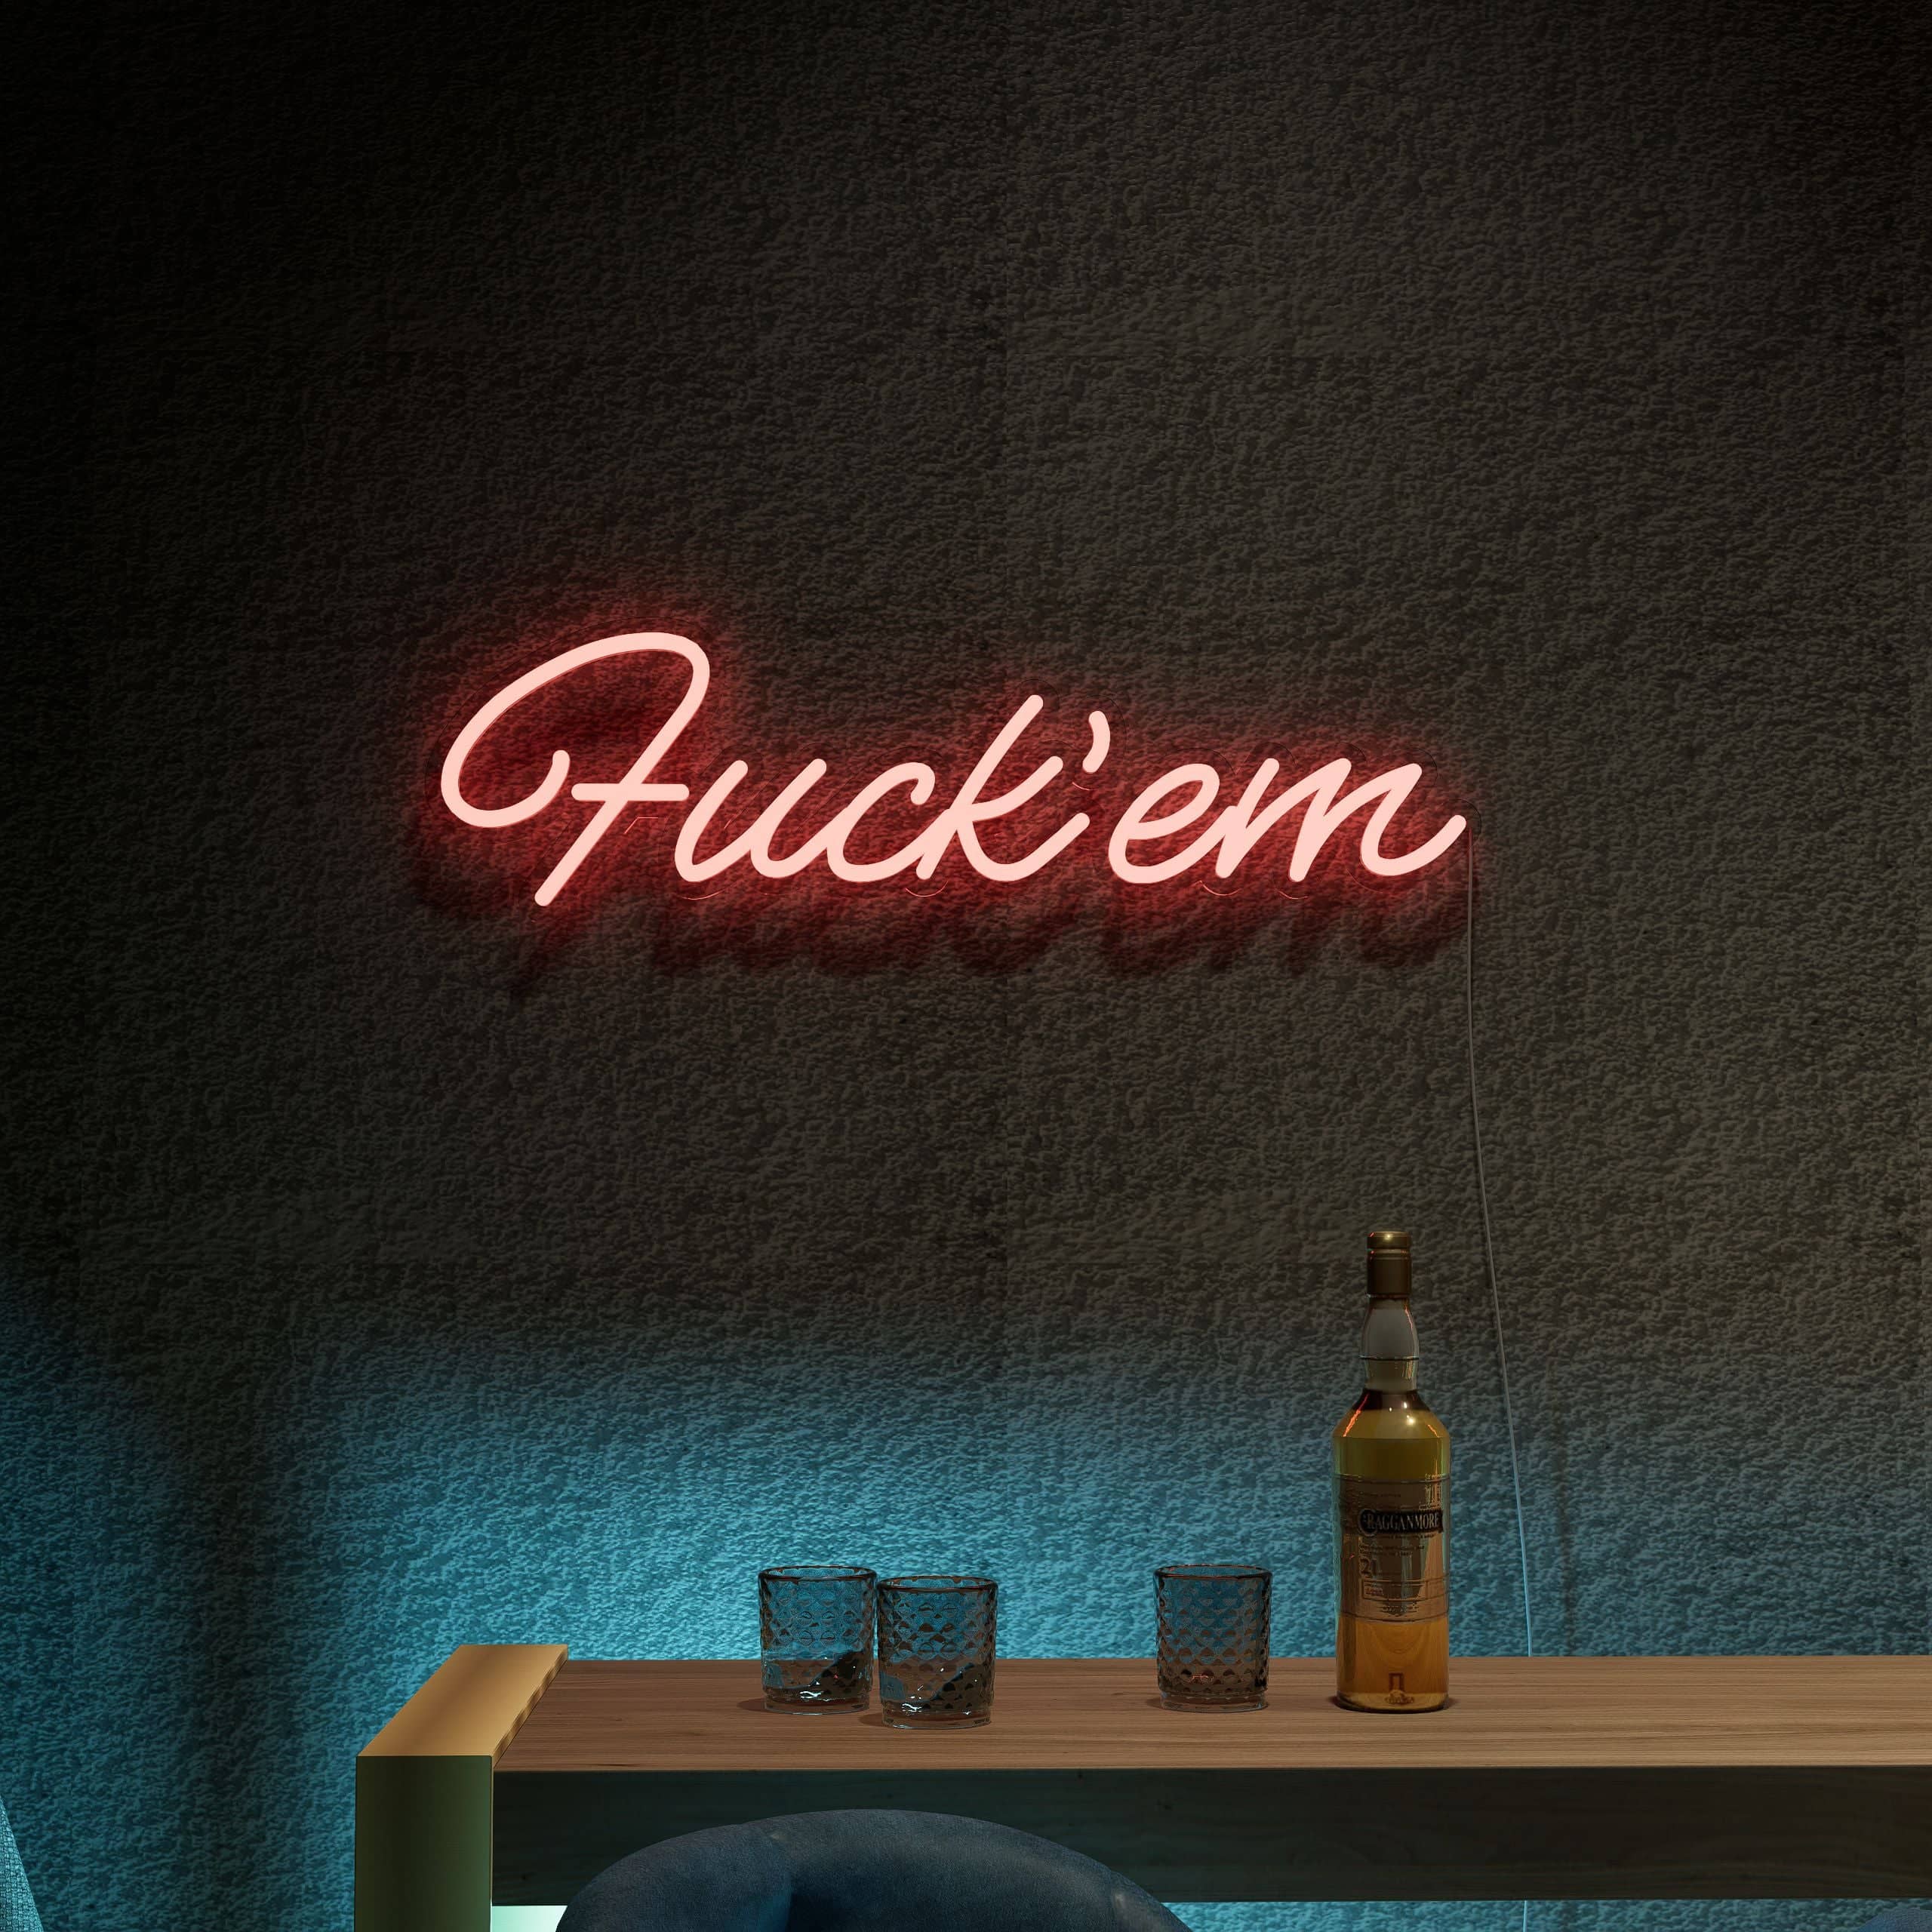 pause-and-unwind-neon-sign-lite